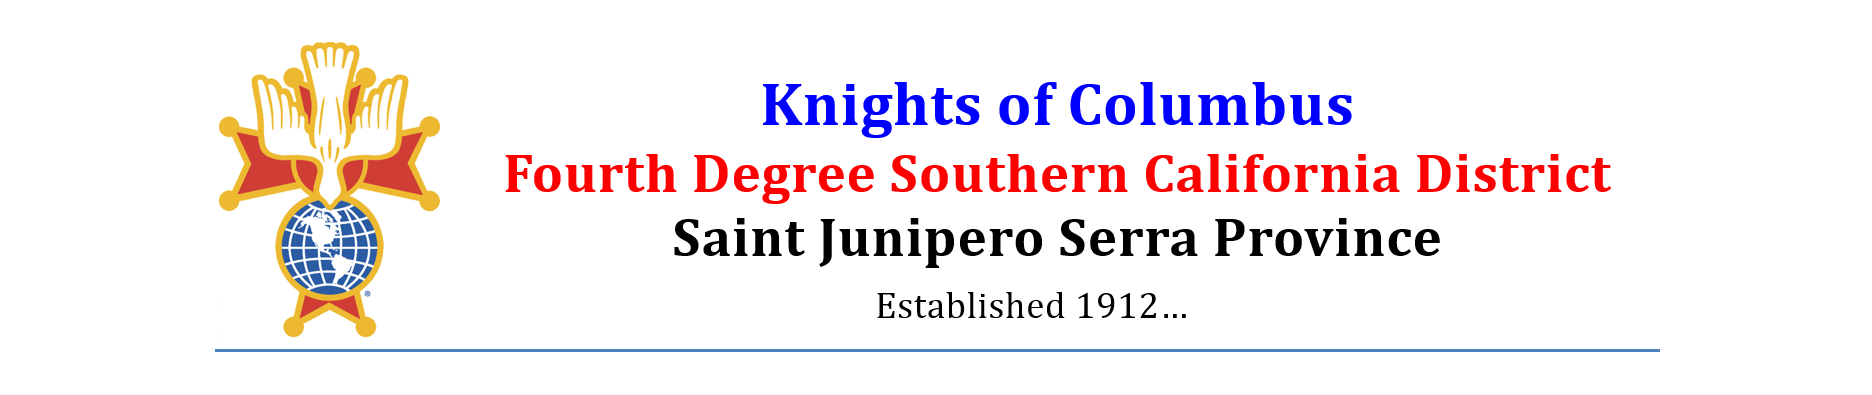 Knights of Columbus - Fourth Degree - Southern California District